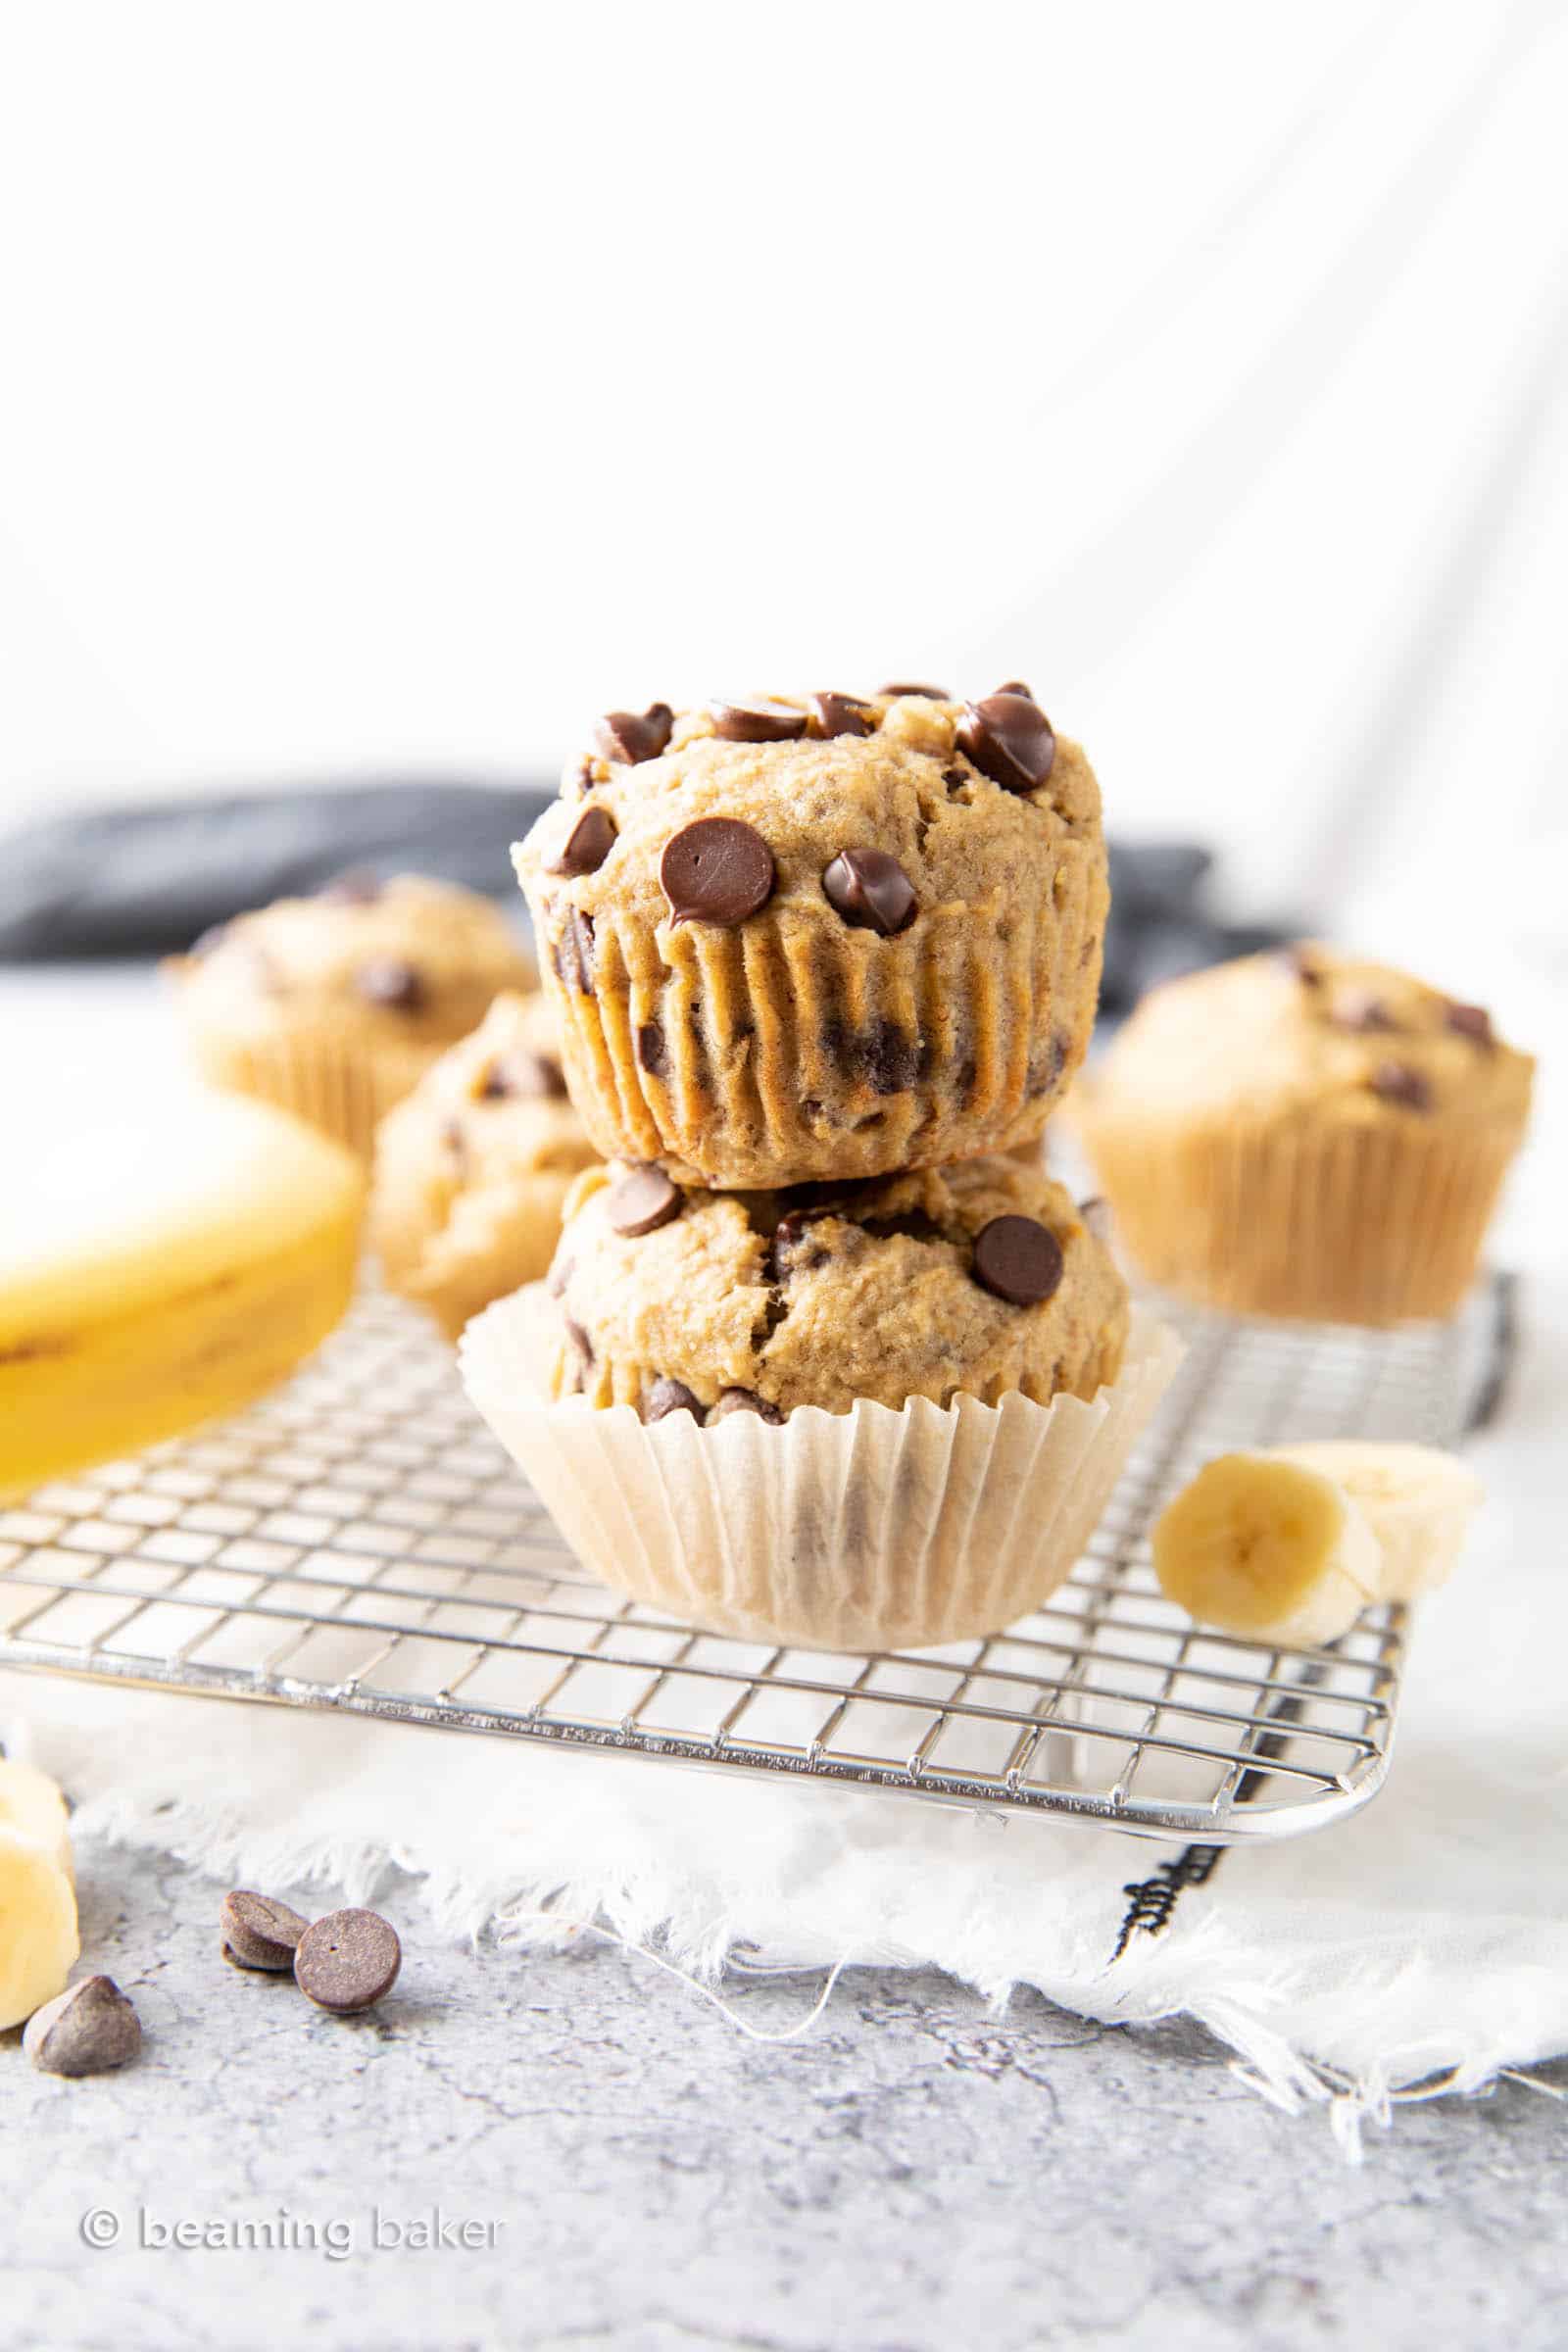 Healthy Banana Chocolate Chip Muffins: soft & moist banana bread muffins with sky-high, crispy tops, melty chocolate chips & BIG banana flavor. Whole ingredients, Plant-Based. #Muffins #Bananas #Chocolate #Healthy | Recipe at BeamingBaker.com